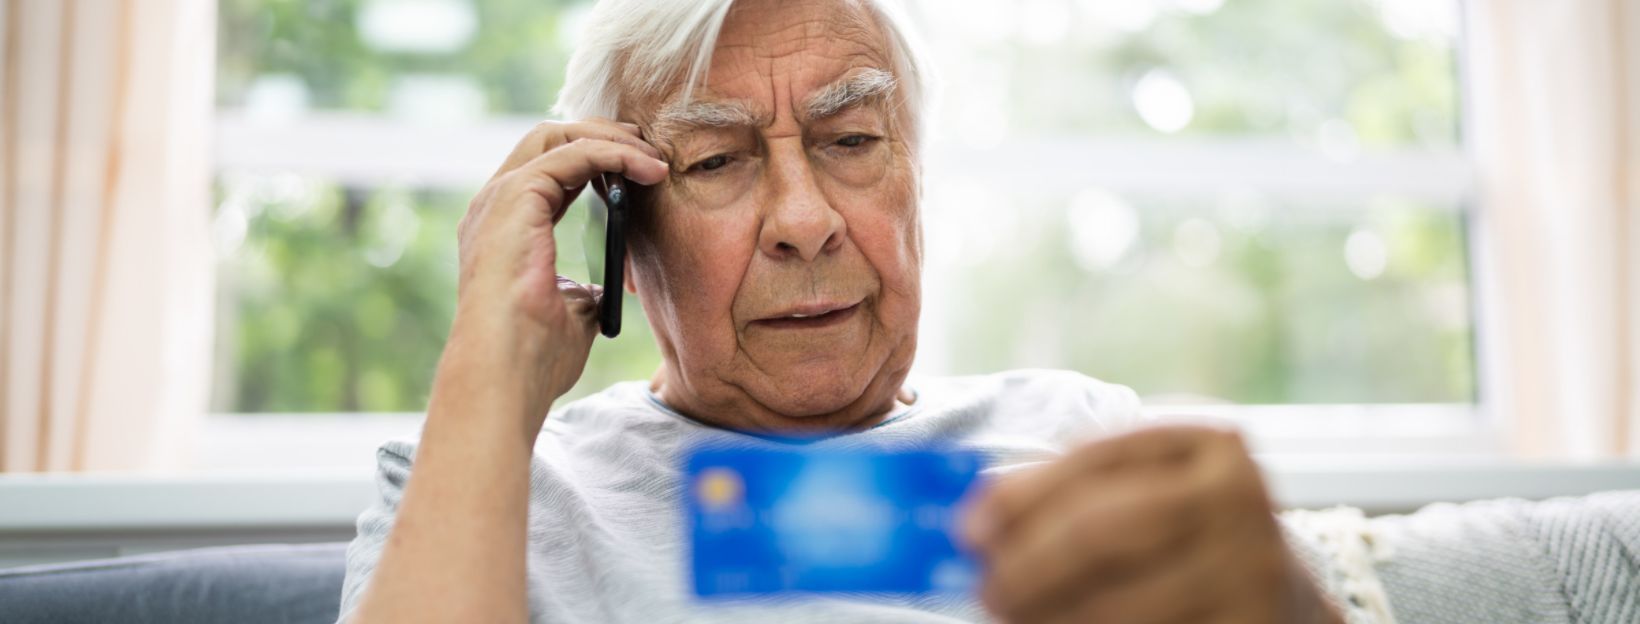 Watching for Signs of Elder Financial Fraud and Abuse